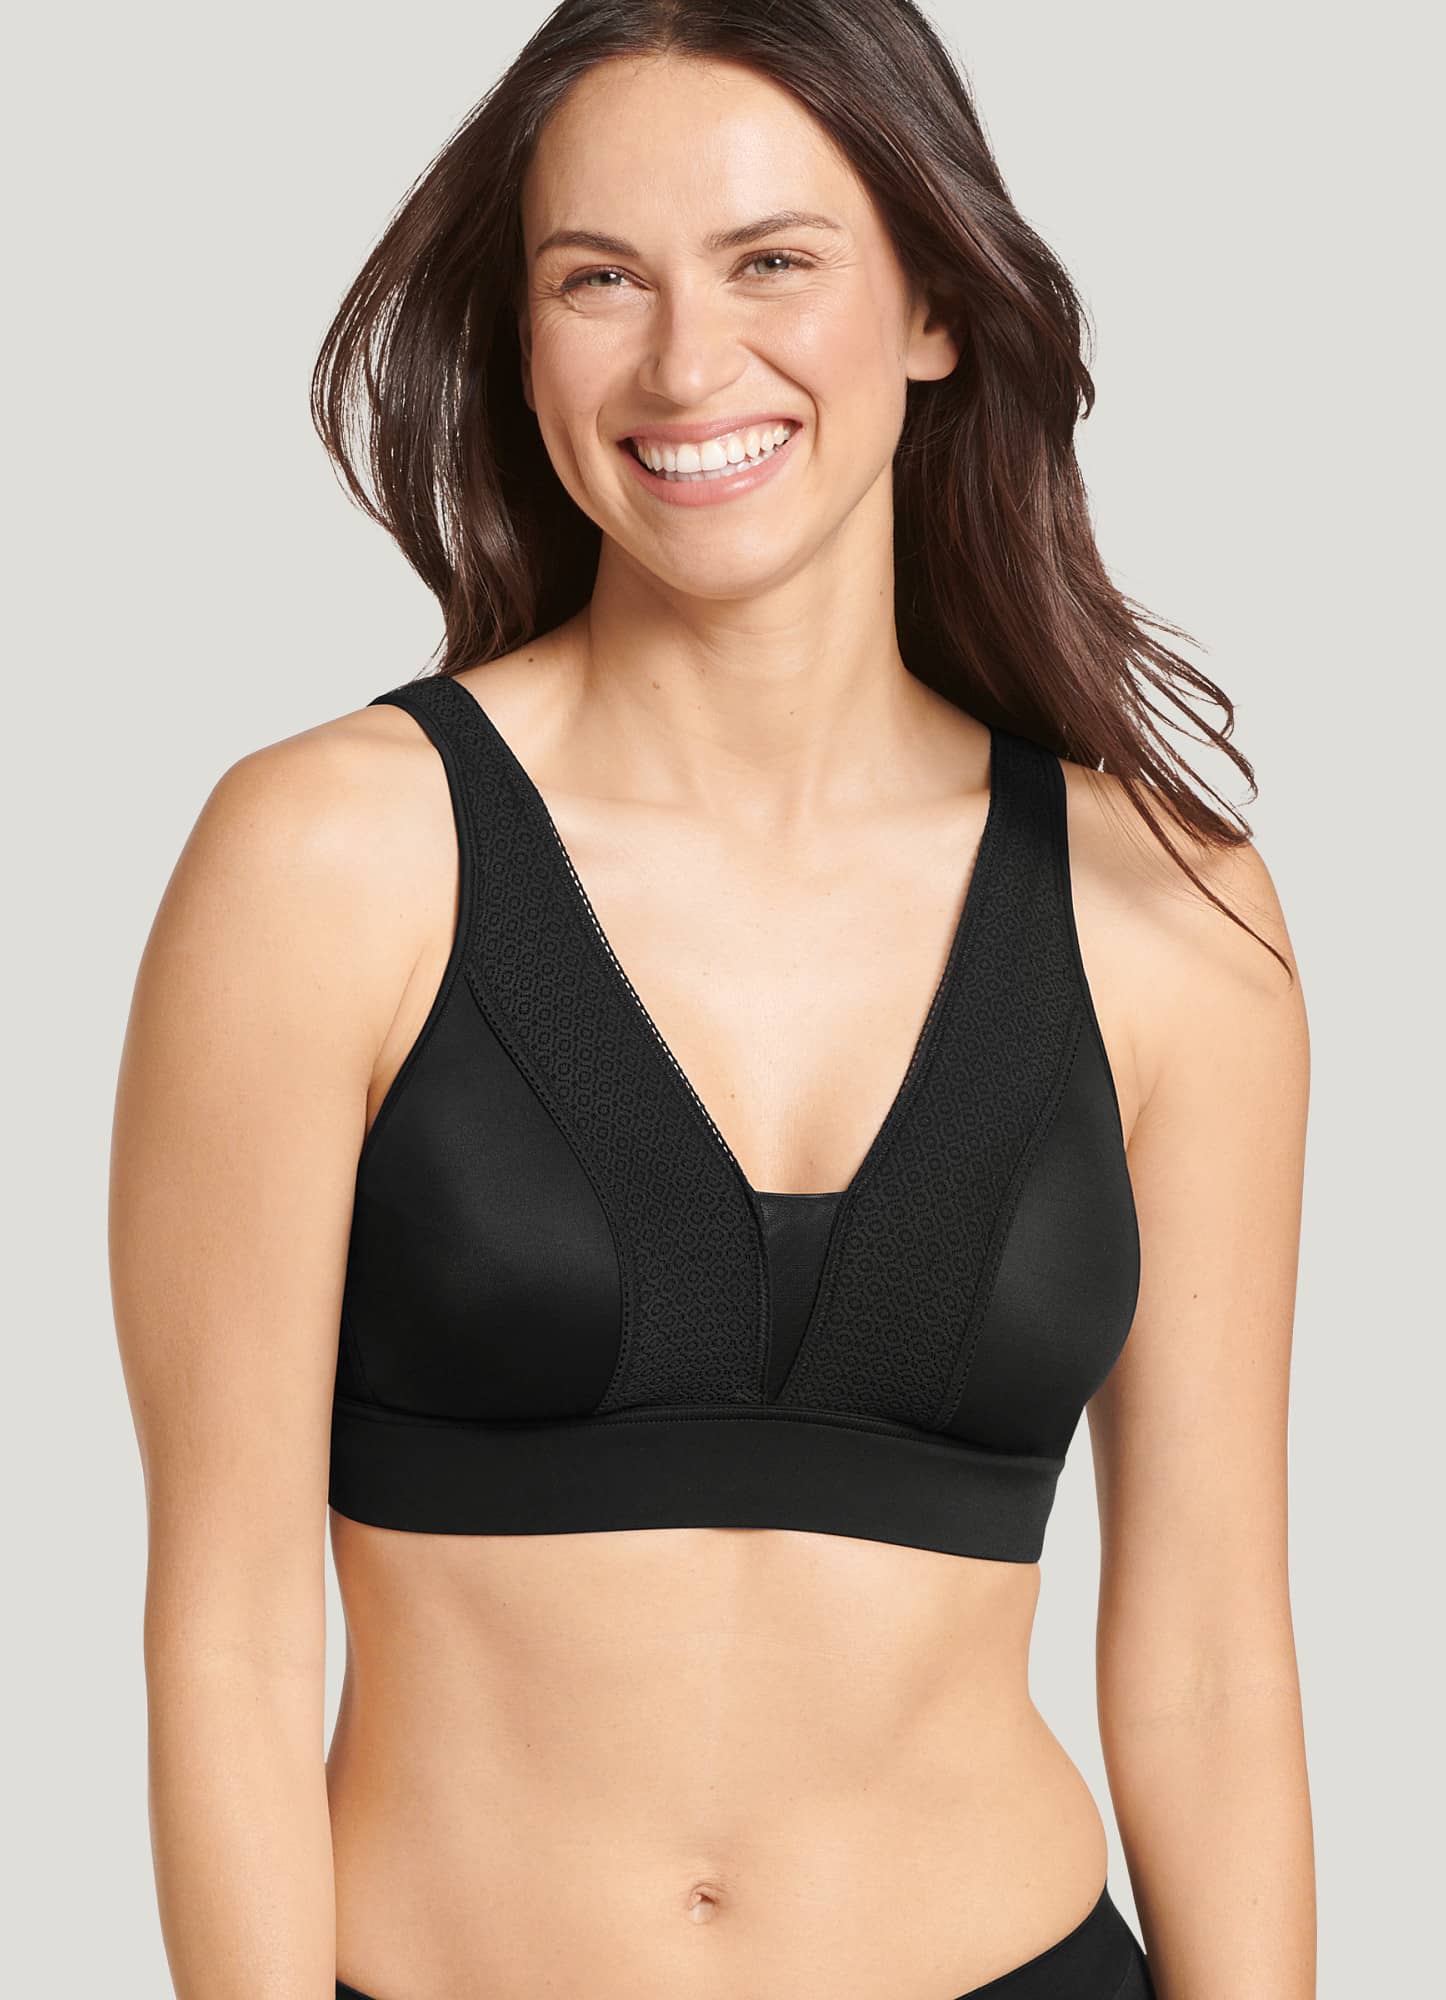 Lejafay Women's Full Coverage Lace Trim Underwired Bra Sexy Sheer